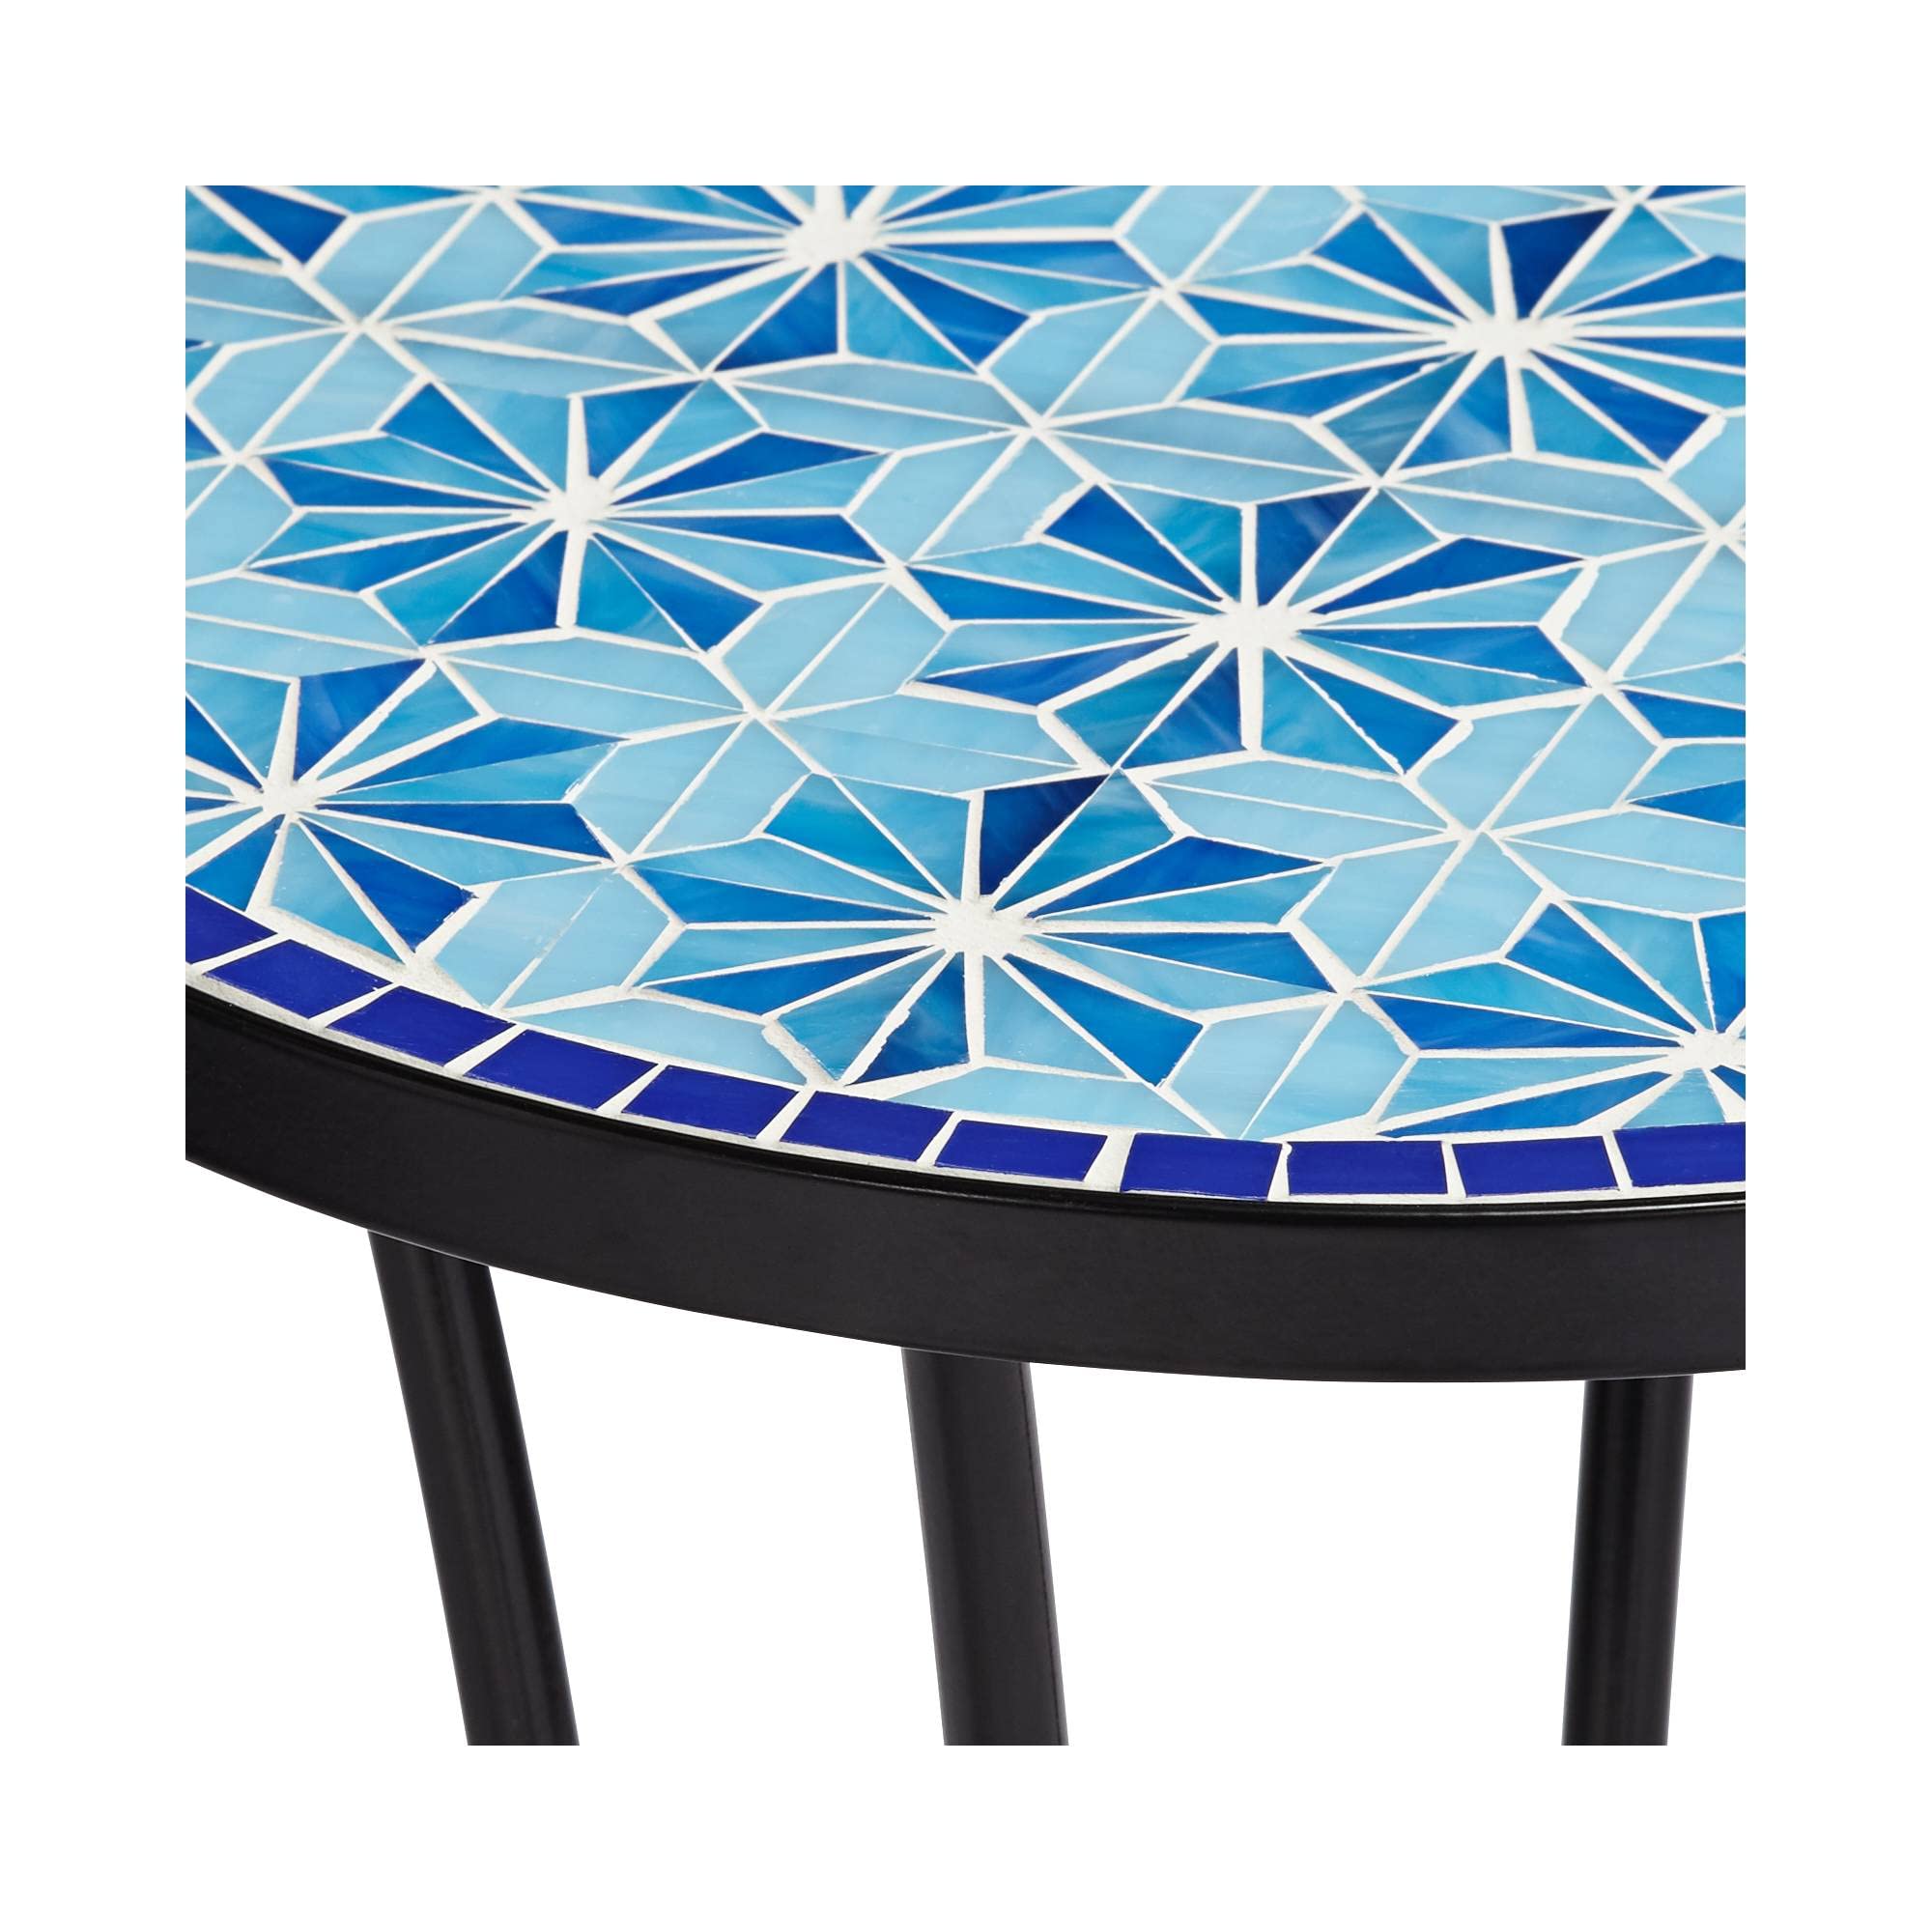 Teal Island Designs Blue Star Modern Black Metal Round Outdoor Accent Side Table 14" Wide with Lower Shelf Mosaic Tabletop Gracefully Curved Legs for Porch Patio Home House Balcony Spaces Deck